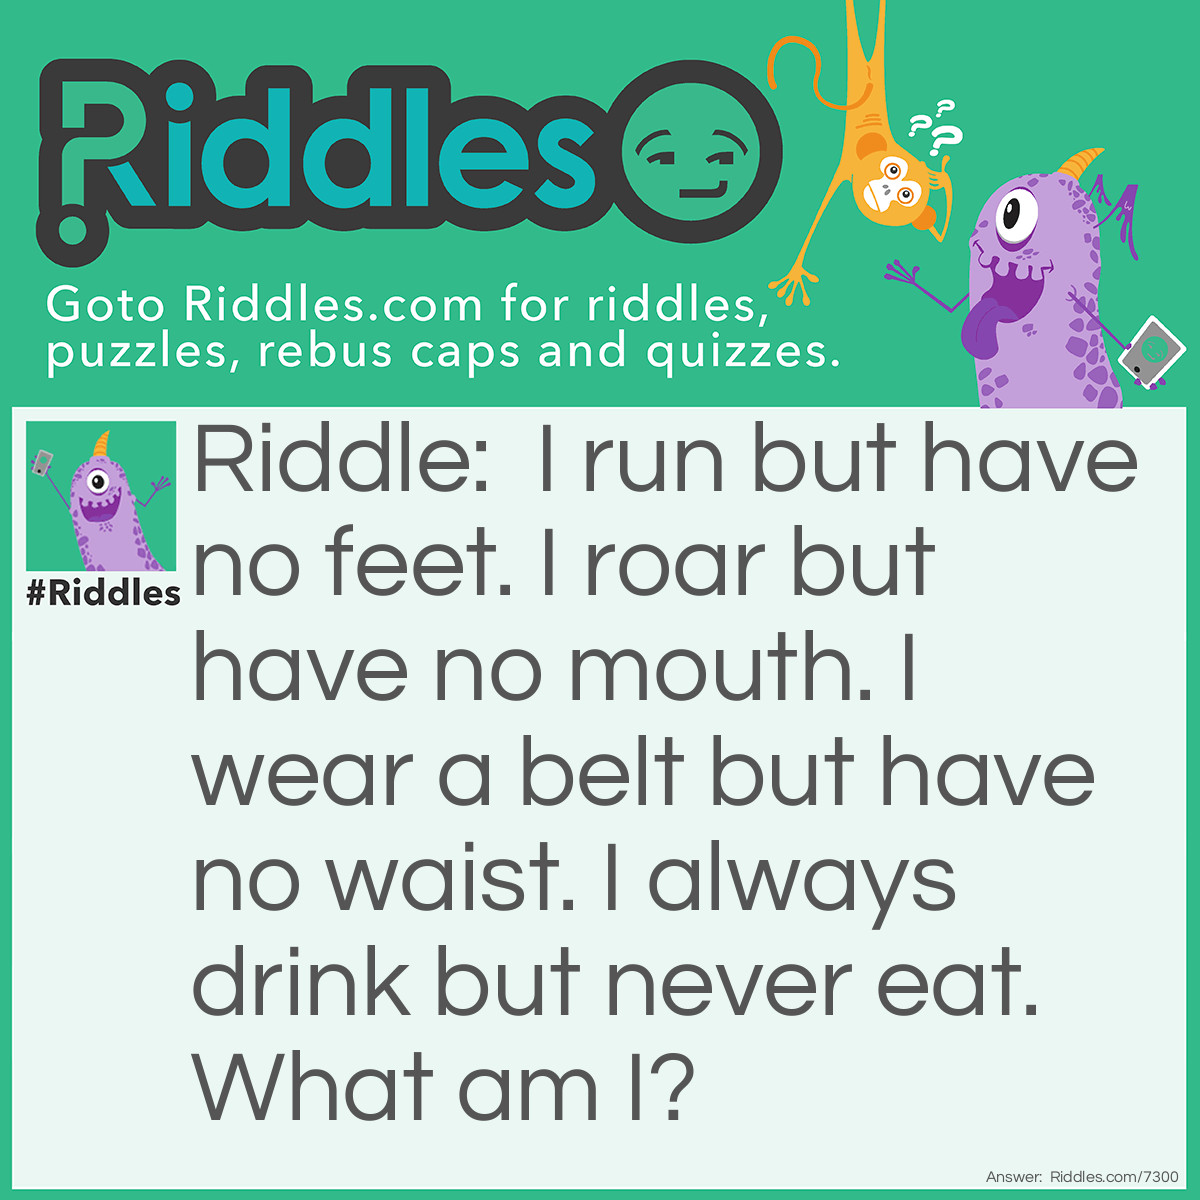 Riddle: I run but have no feet. I roar but have no mouth. I wear a belt but have no waist. I always drink but never eat. What am I? Answer: Engine.